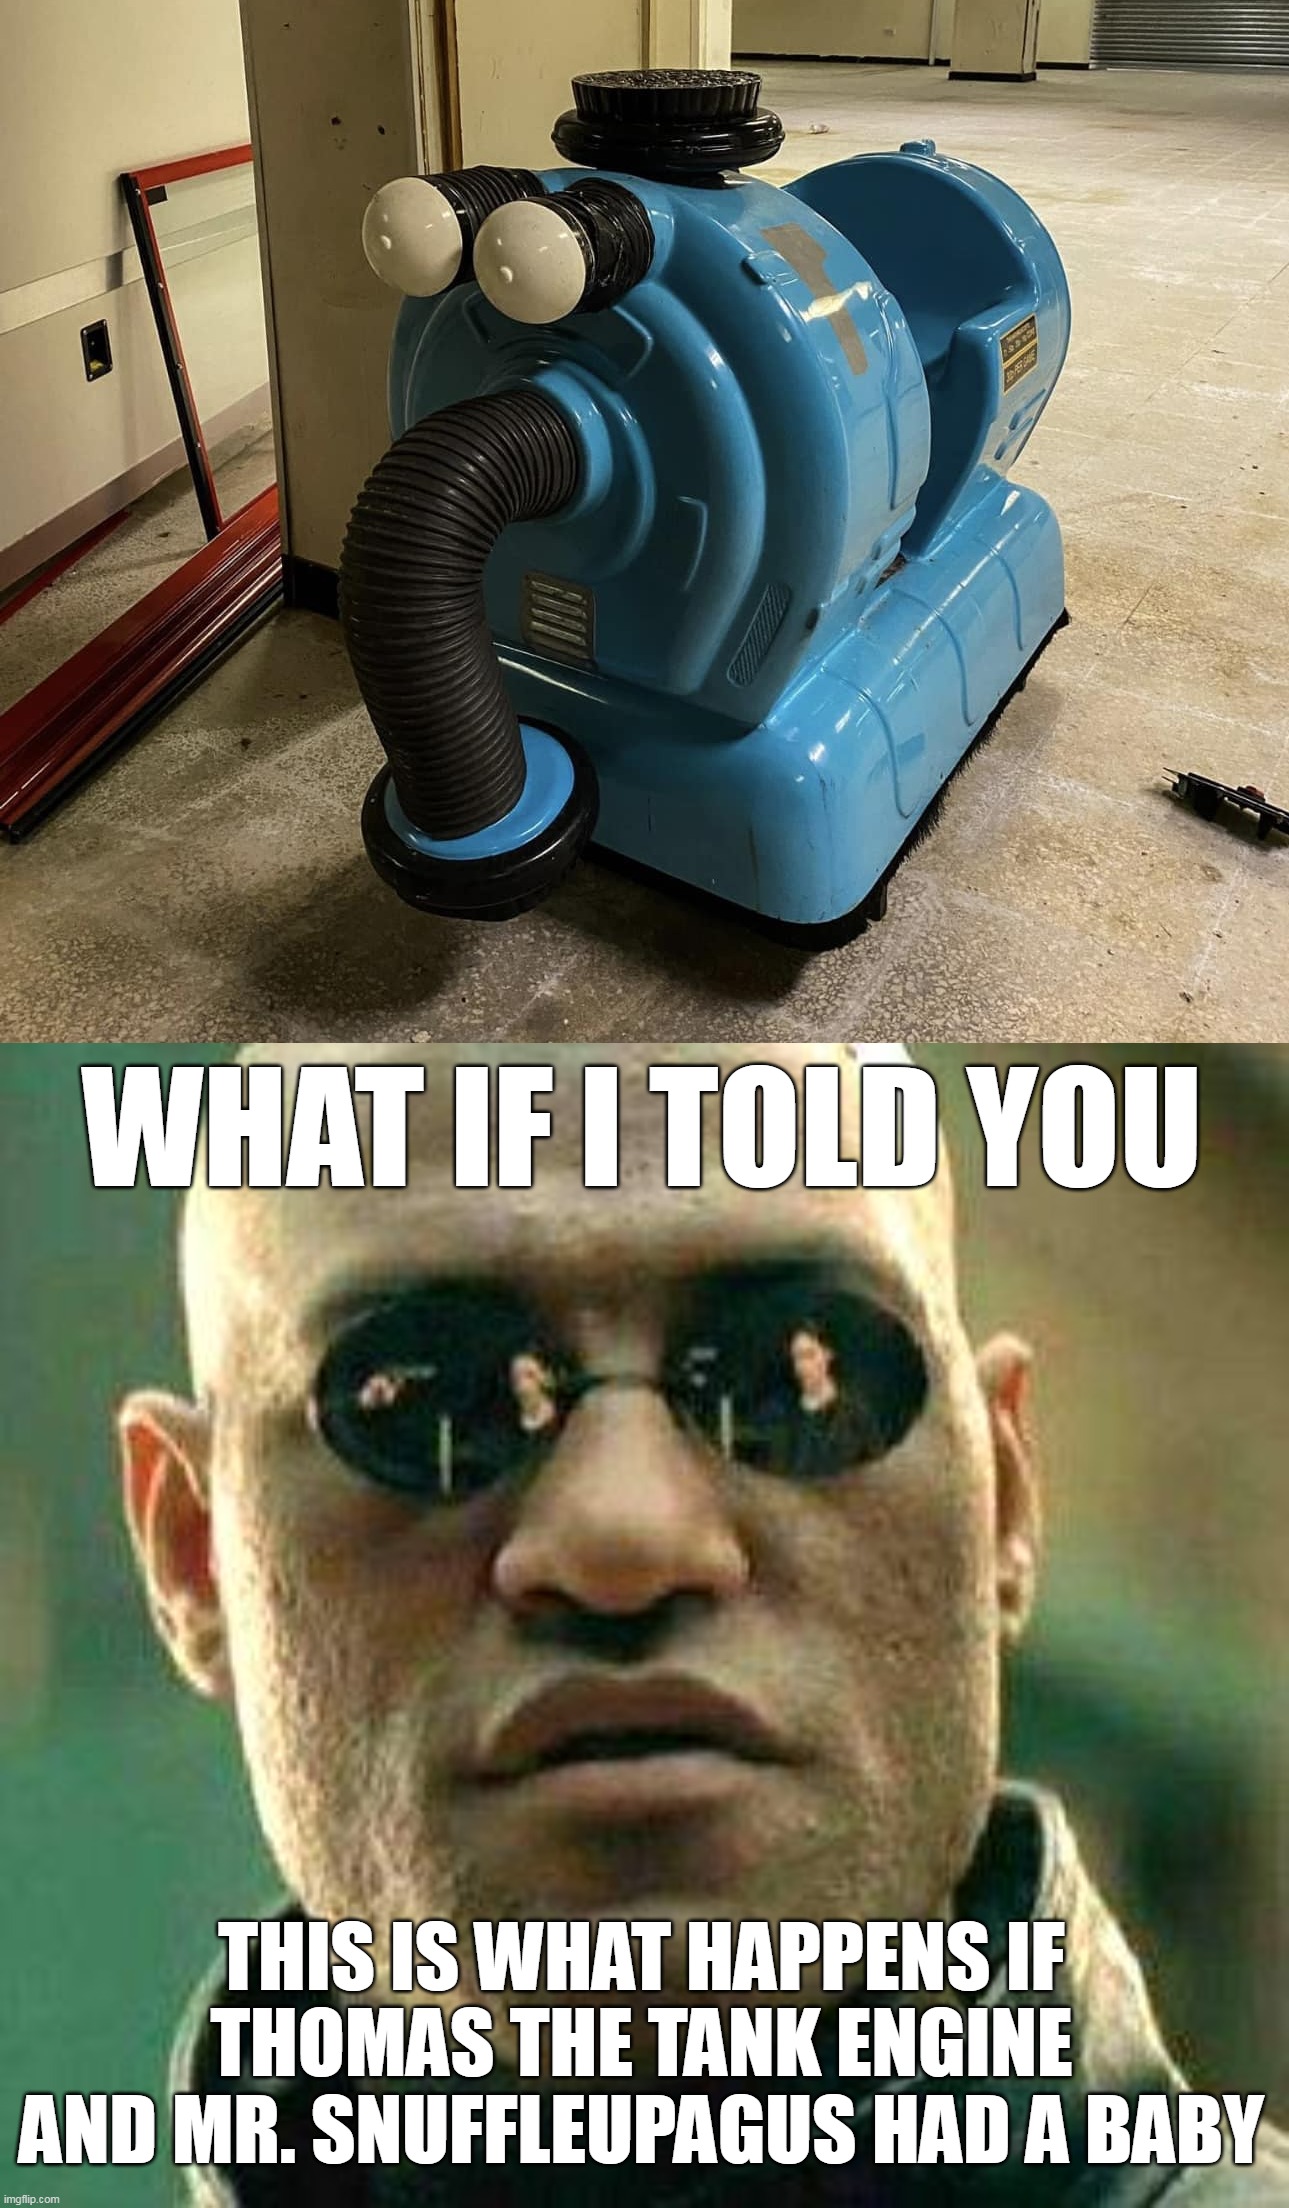 WHAT IF I TOLD YOU; THIS IS WHAT HAPPENS IF THOMAS THE TANK ENGINE AND MR. SNUFFLEUPAGUS HAD A BABY | image tagged in what if i told you,meme,memes,dank memes,funny | made w/ Imgflip meme maker